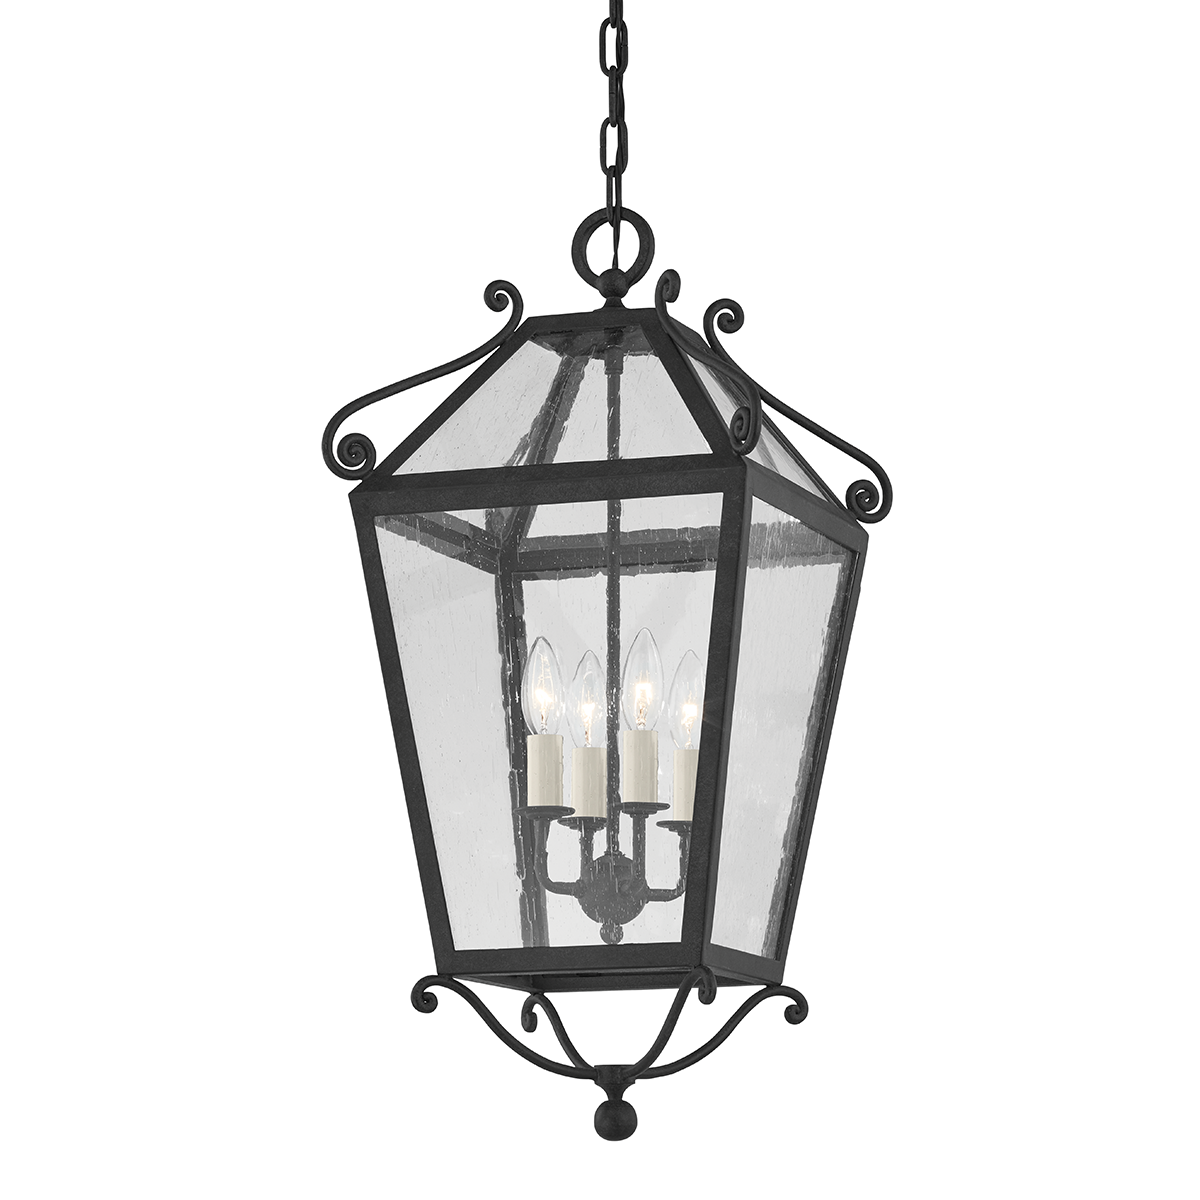 Troy Lighting 4 LIGHT EXTERIOR LANTERN F4128 Outdoor l Wall Troy Lighting FRENCH IRON  